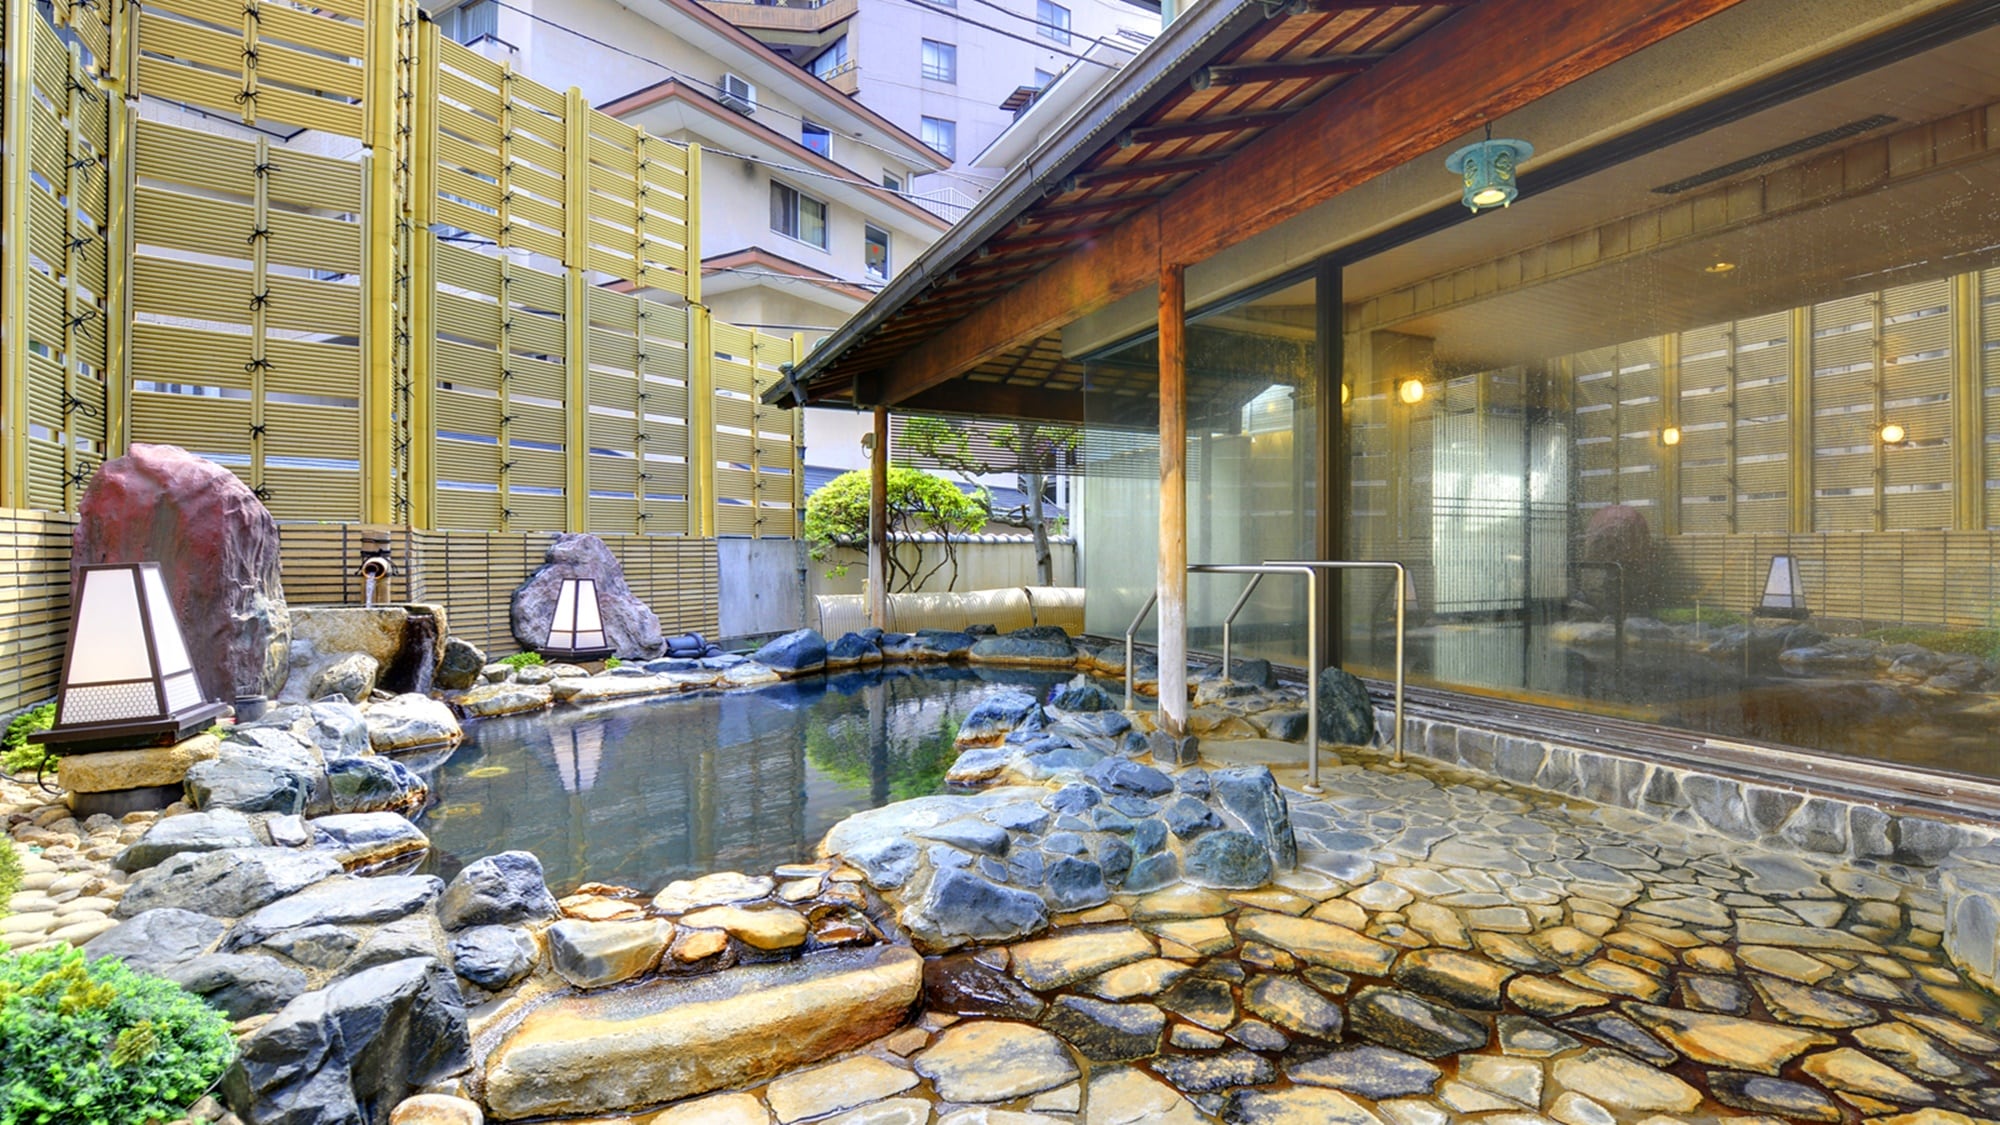 * Tonokata open-air bath. Both men's and women's public baths are 100% natural hot springs without water heating. Of course, it is owned by the private source.